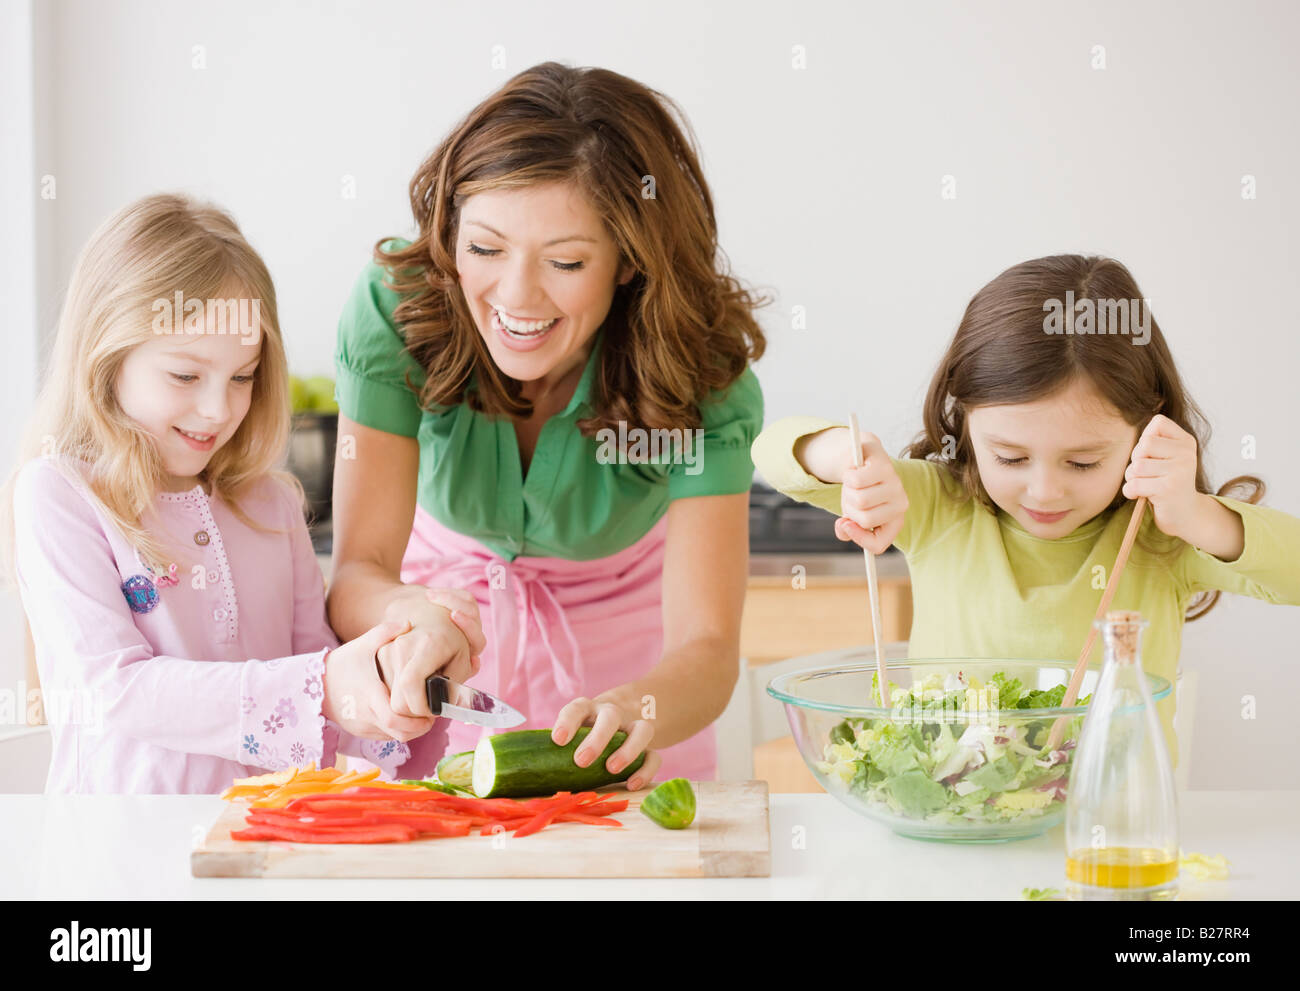 Mother and daughters preparing food Stock Photo